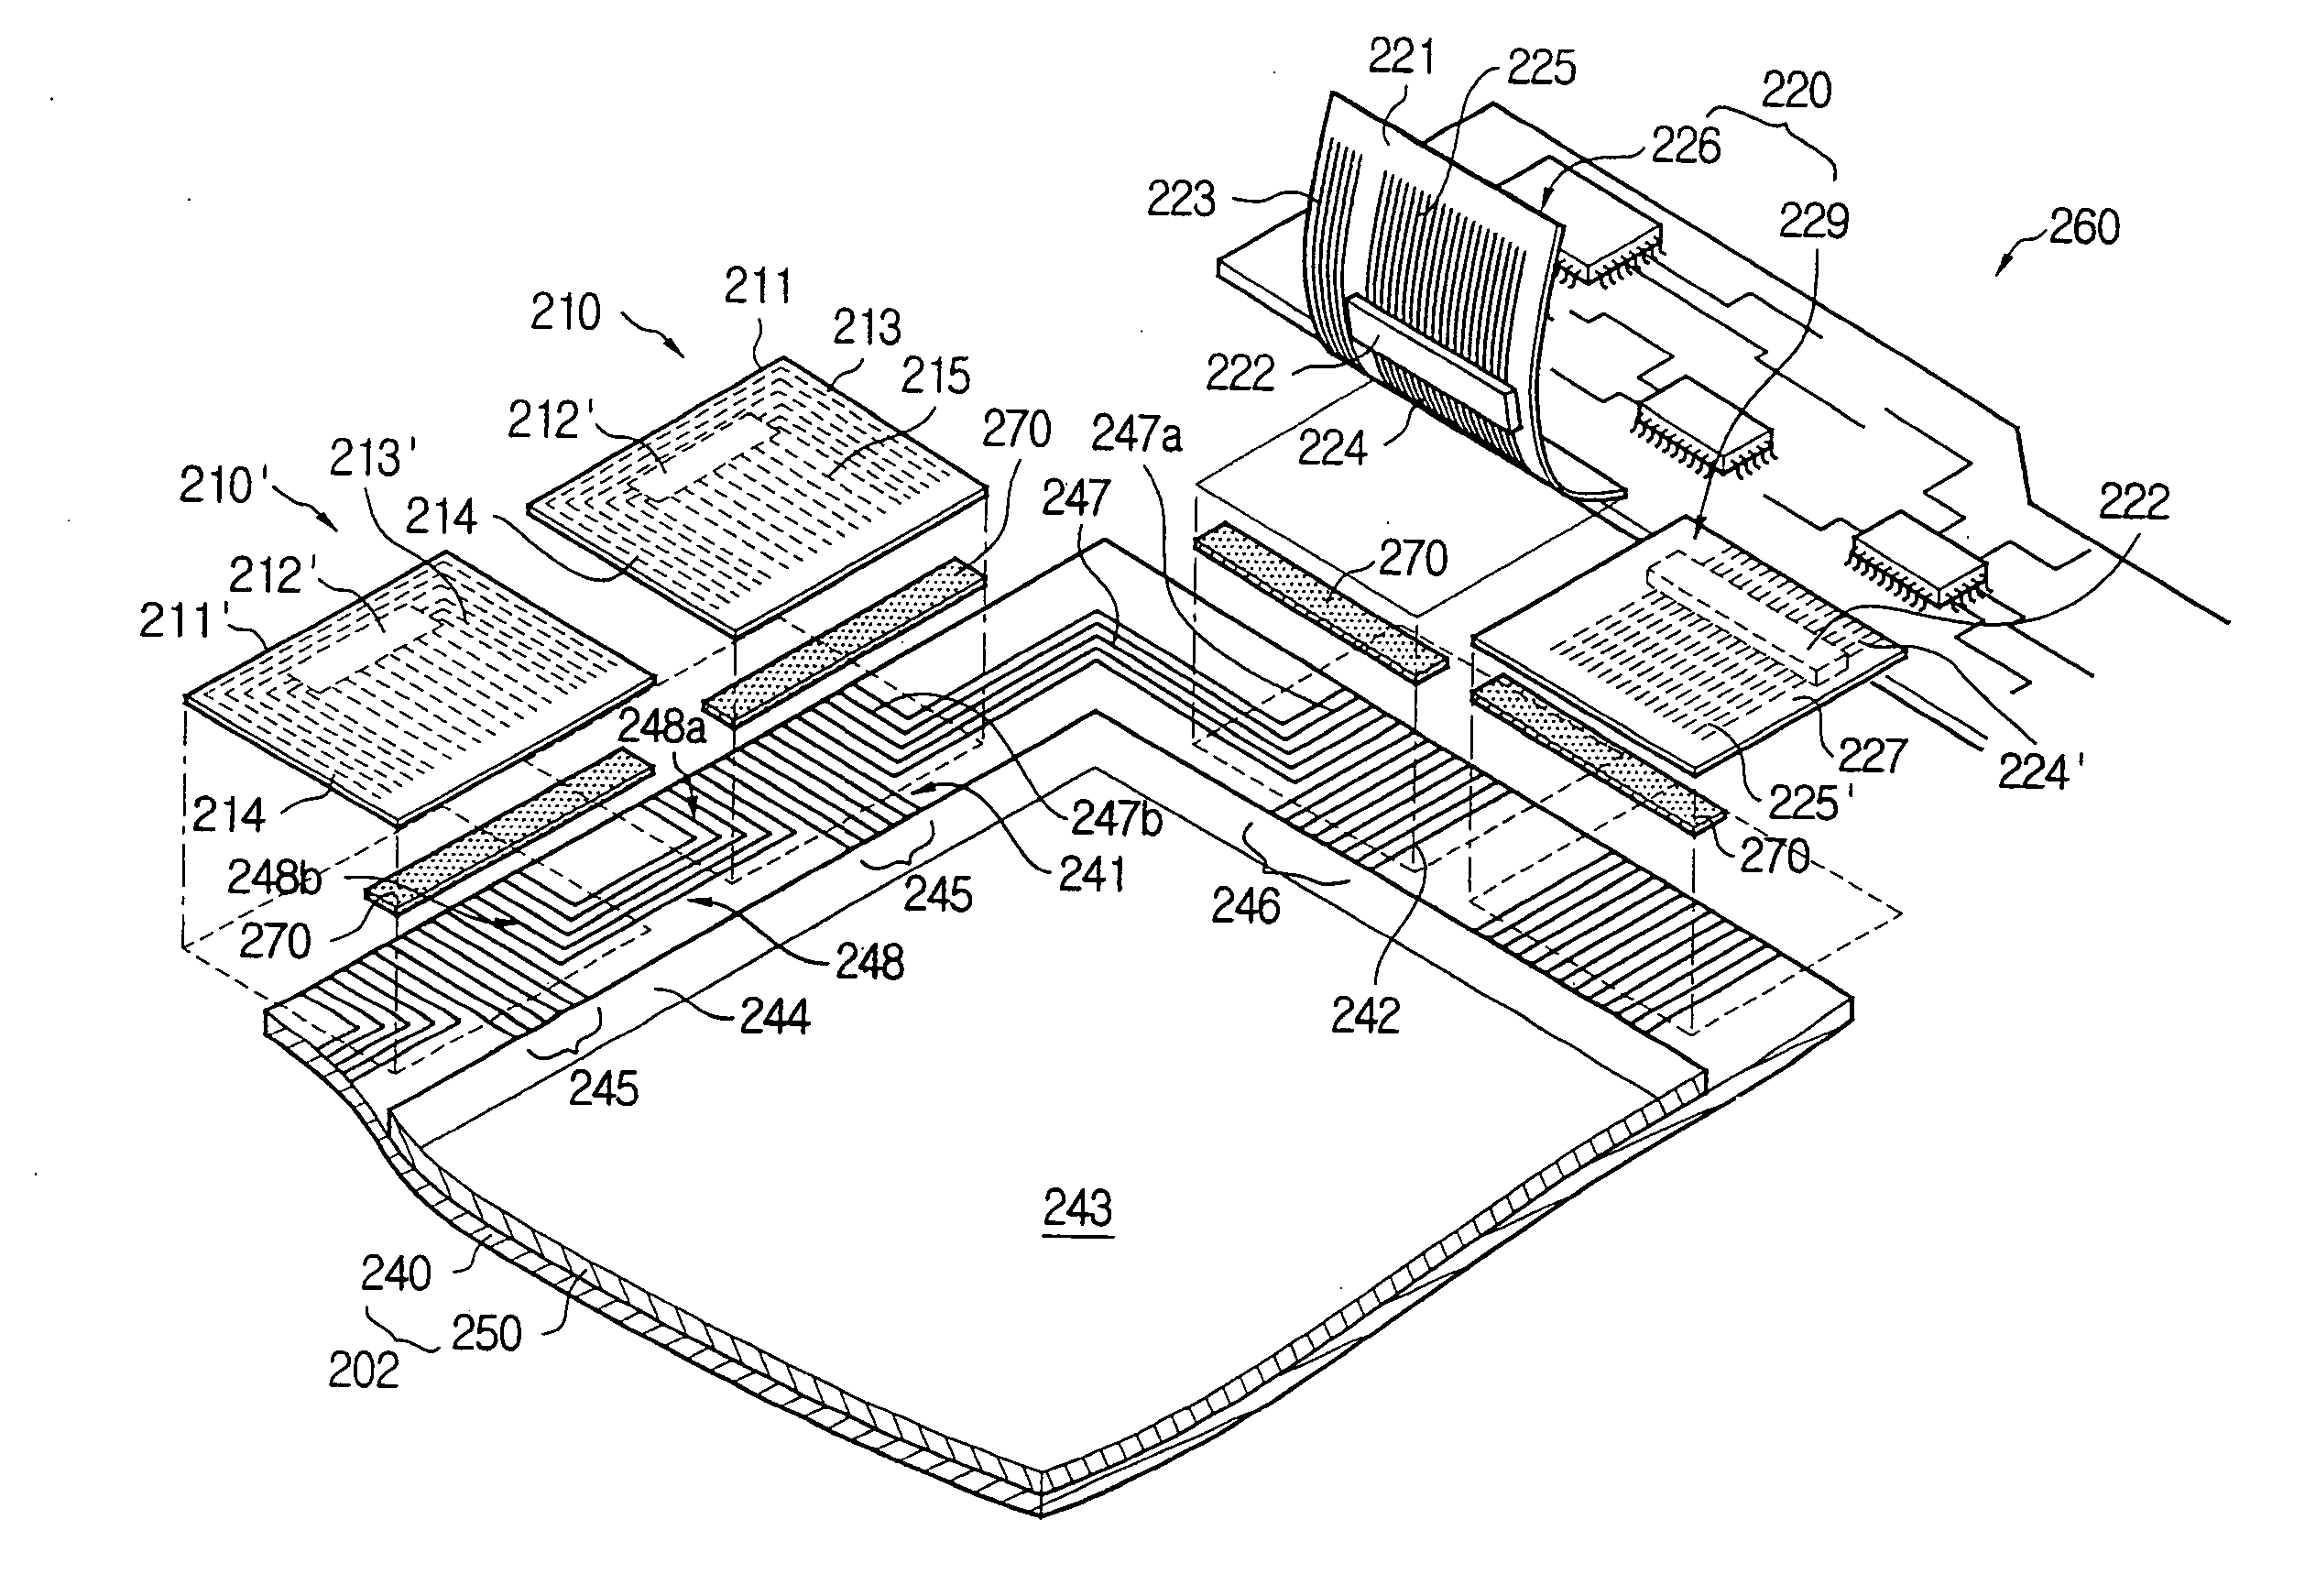 Display panel with signal transmission patterns